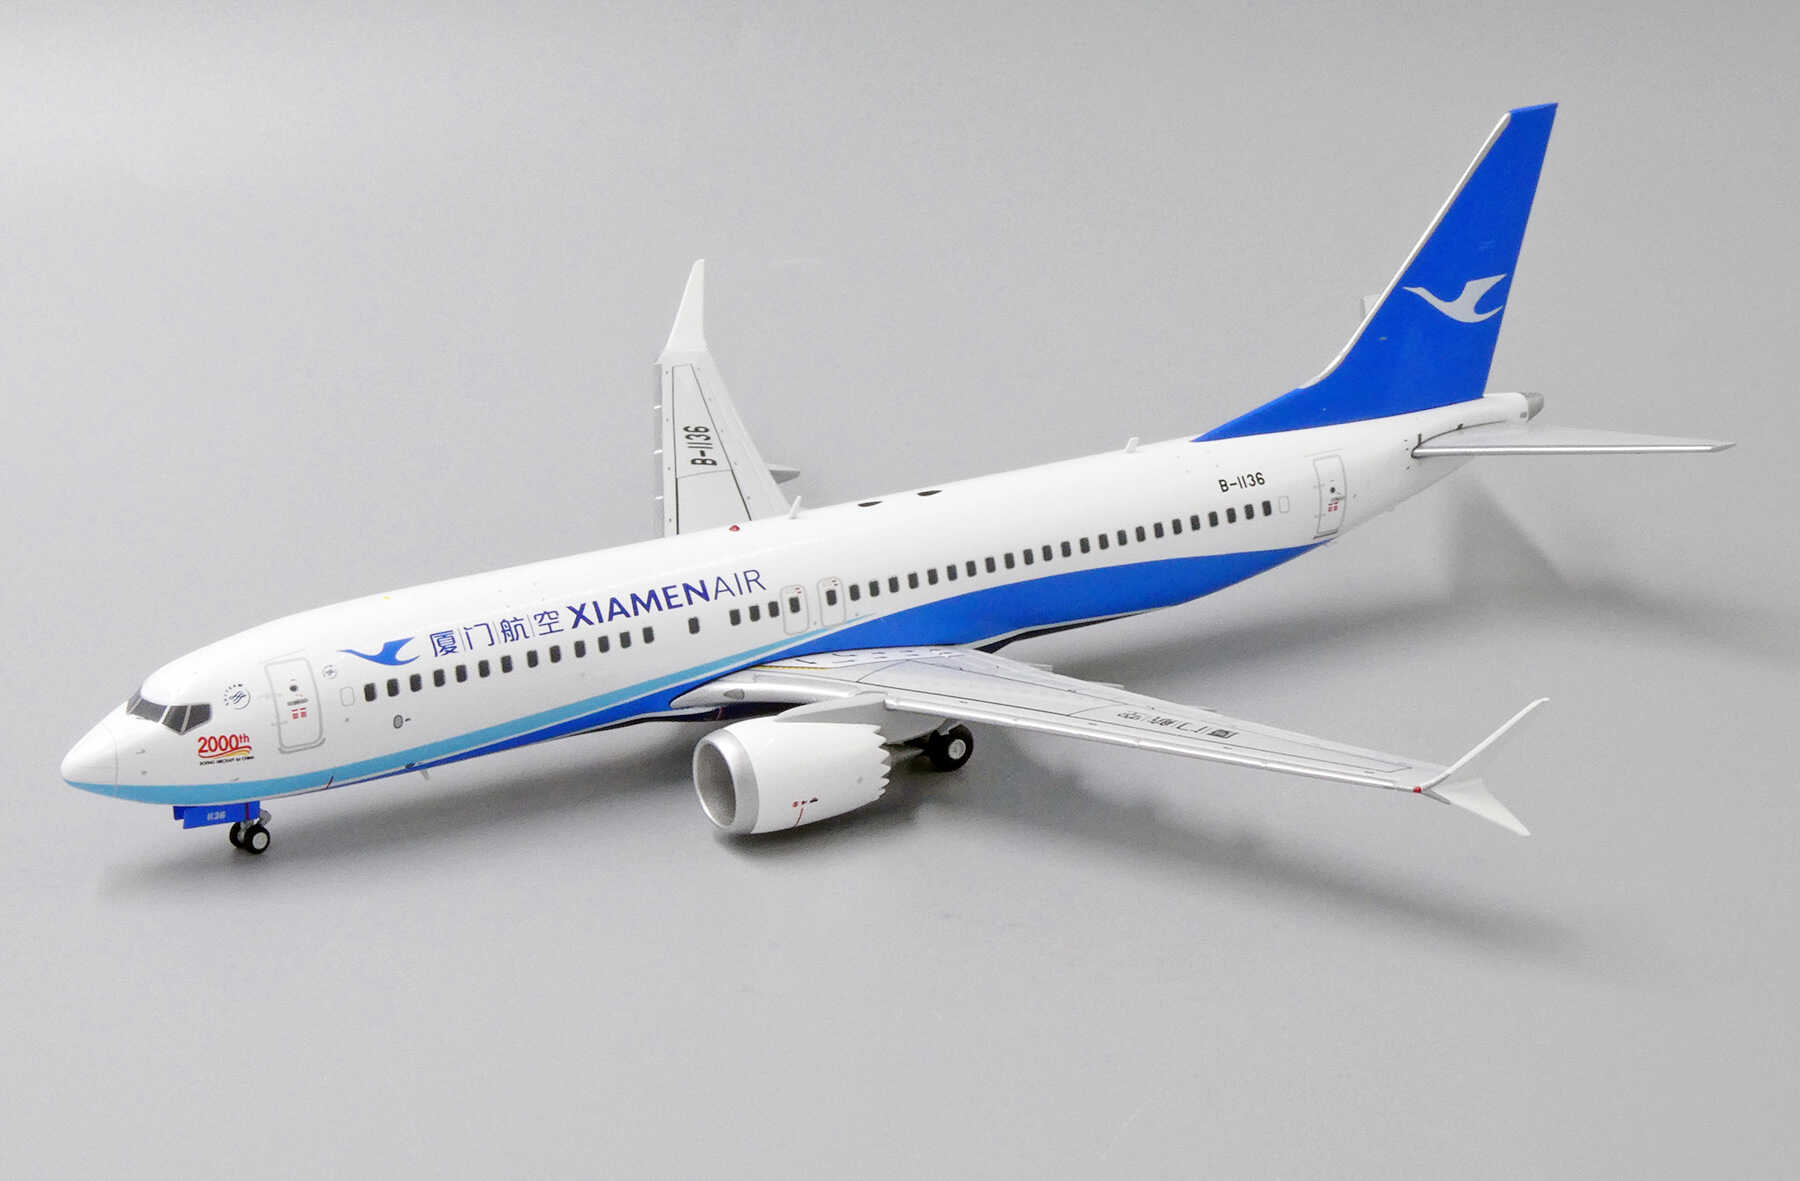 JC WINGS LH2135 1/200 XIAMEN AIRLINES BOEING 737-8 MAX 2000TH B-1136 WITH STAND 